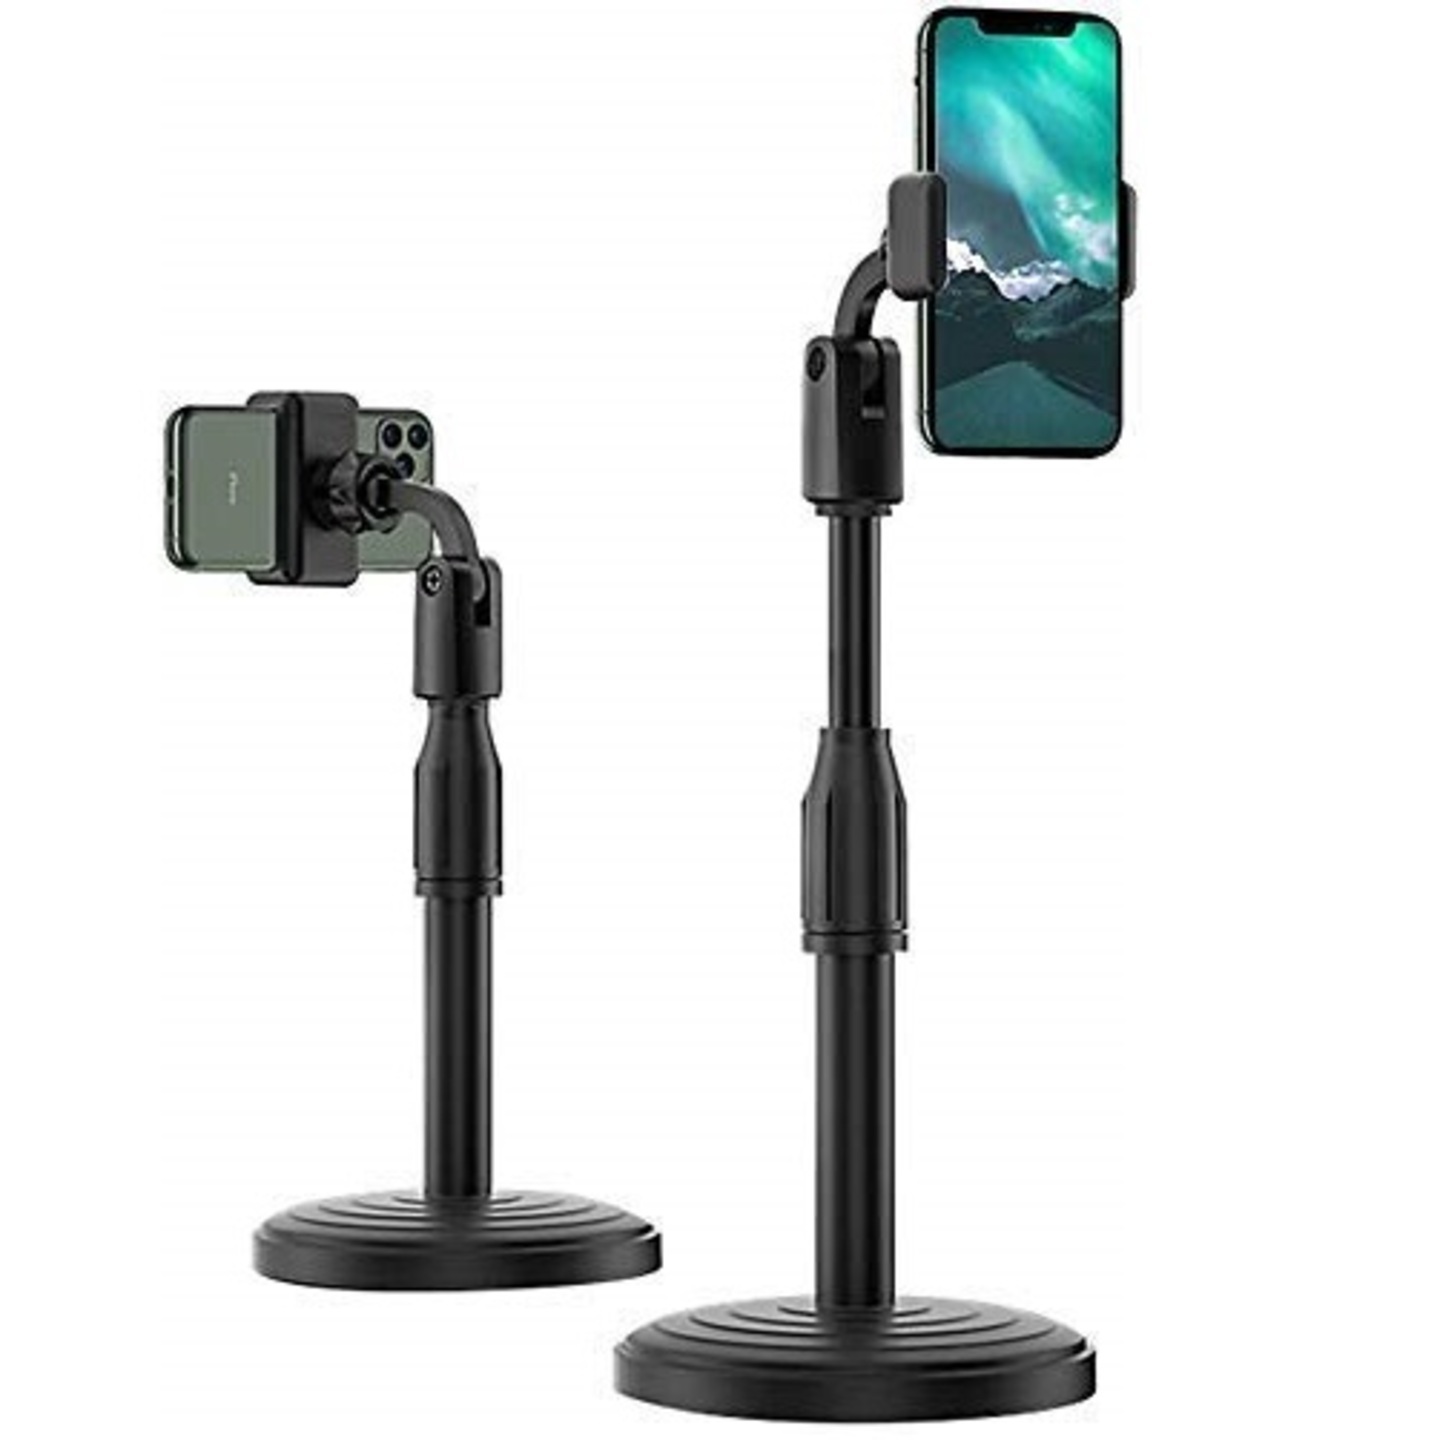 Height and Angle Adjustable Heavy Duty Mobile stand